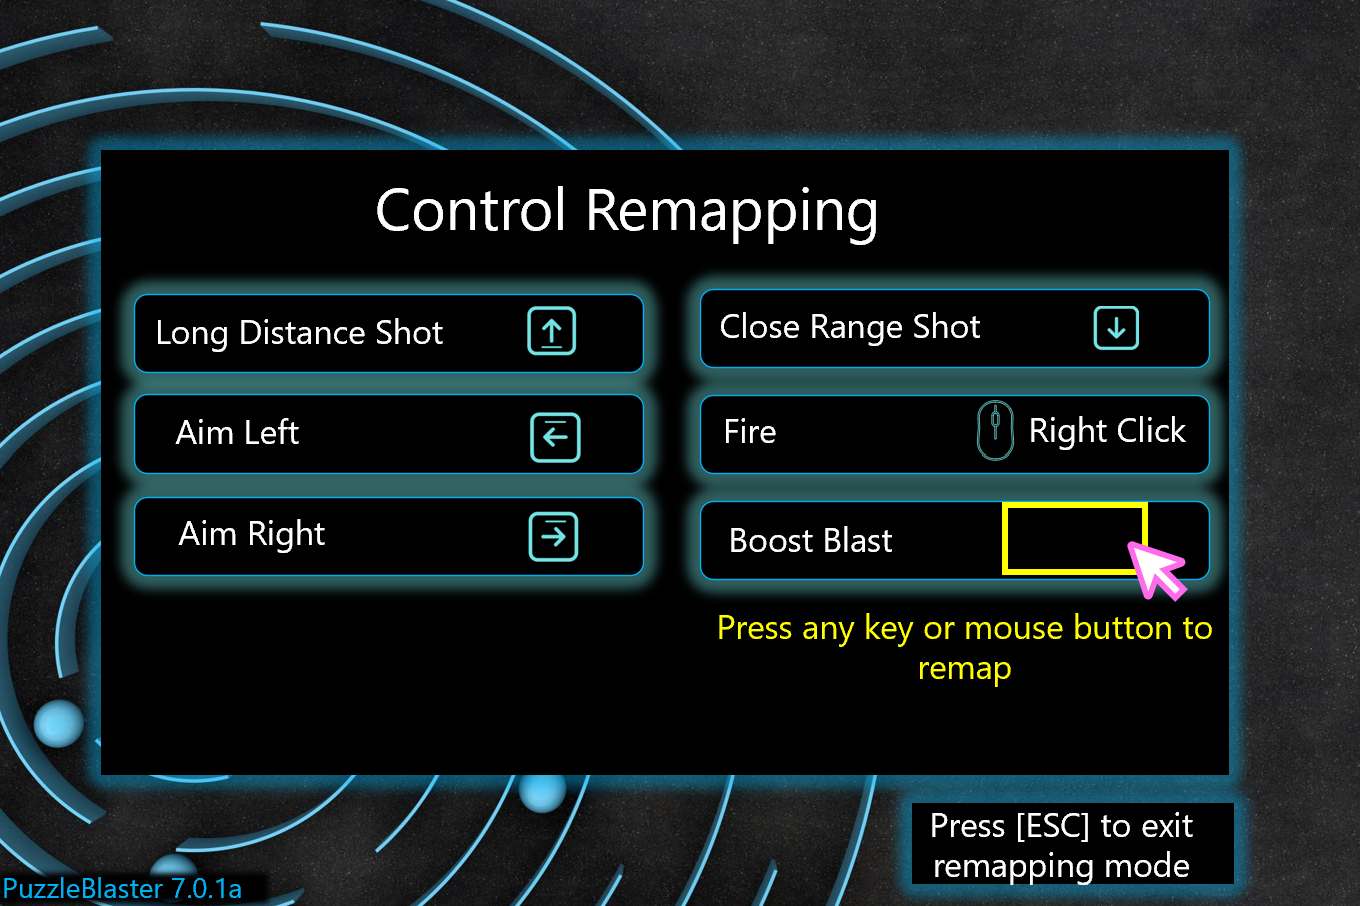 A screenshot from a fake game called "PuzzleBlaster" that shows a "Control Remapping" screen, with a cursor over a "Boost Blast" menu item. Text below reads "Press any key or mouse button to remap," and "Press [ESC] to exit remapping mode."